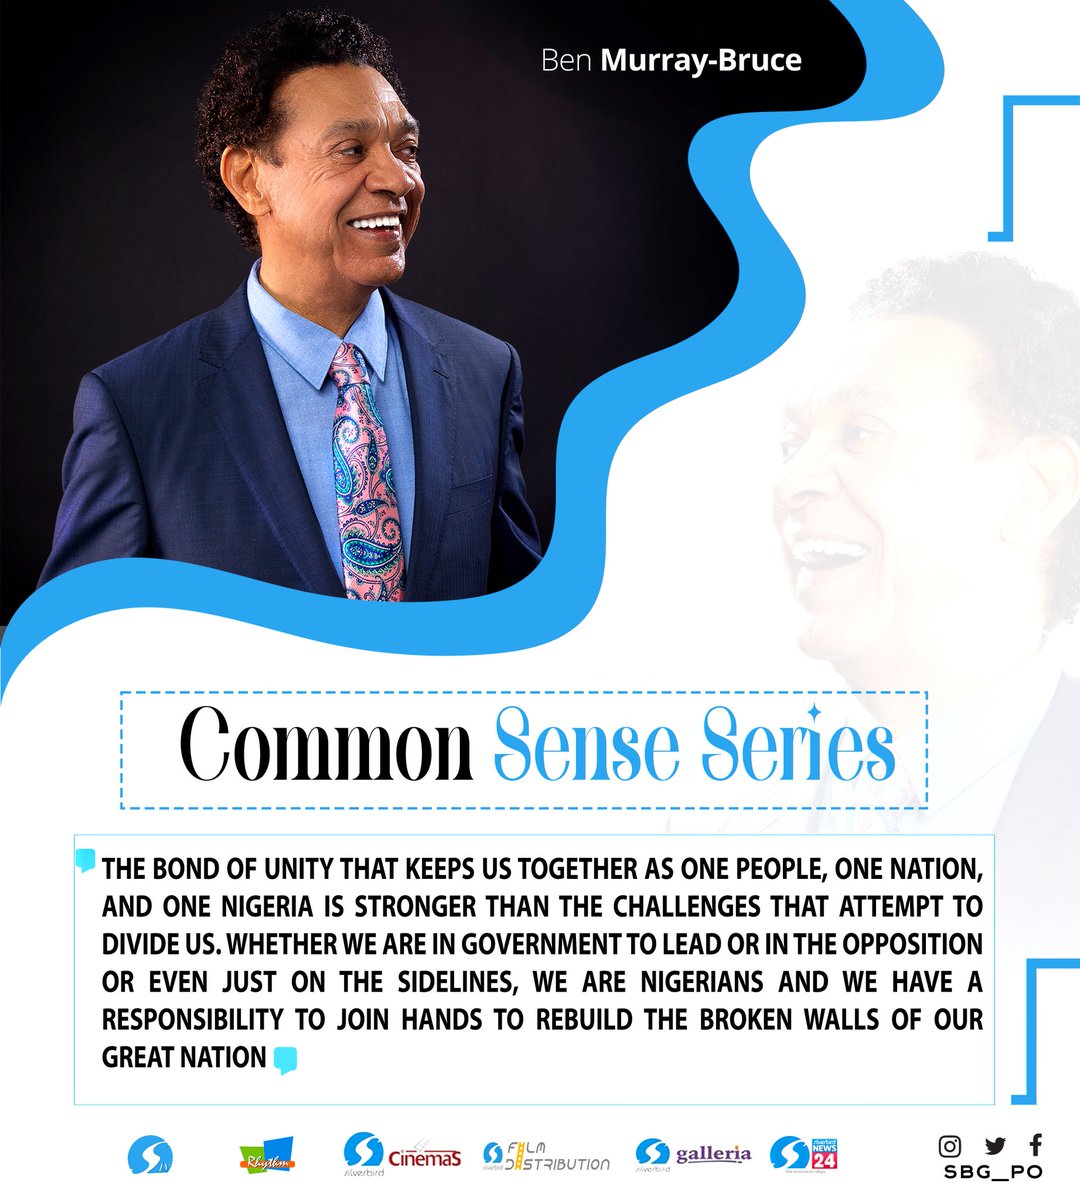 The bond of unity that keeps us together as one people, one nation, and one Nigeria is stronger than the challenges that attempt to divide us - @benmurraybruce
#CommonSensese
@SilverbirdTV
@SilverbirdN24
@SilverbCinemas
@Jos937Rhythm
@Rhythmph
@Rhythm947Abuja
@RhythmFMBenin